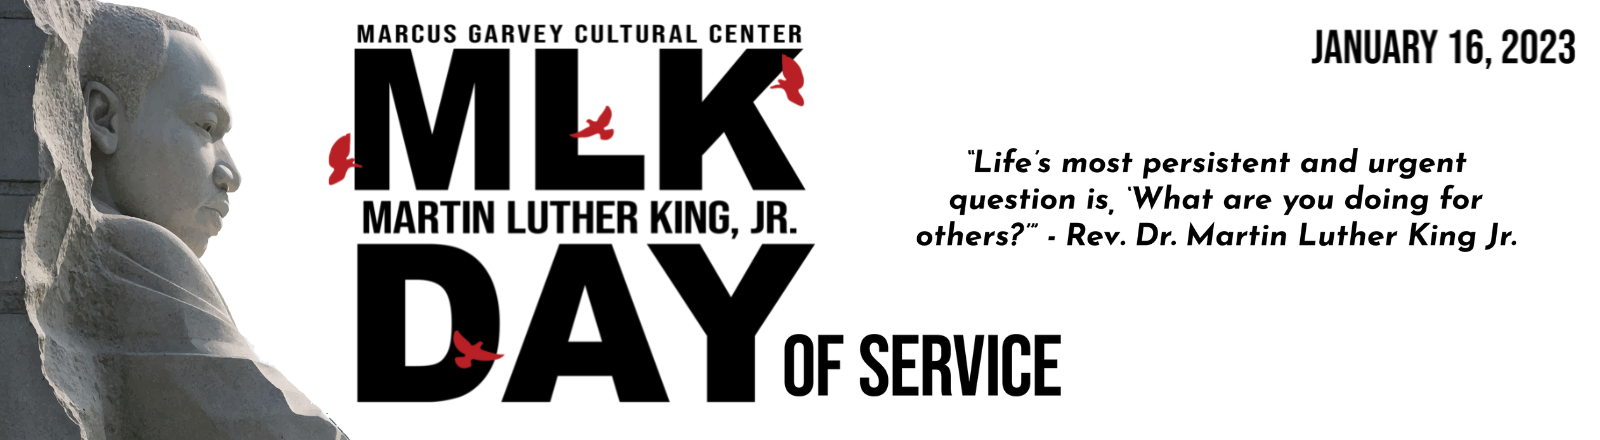 Marcus Garvey Cultural Center MLK Day of Service